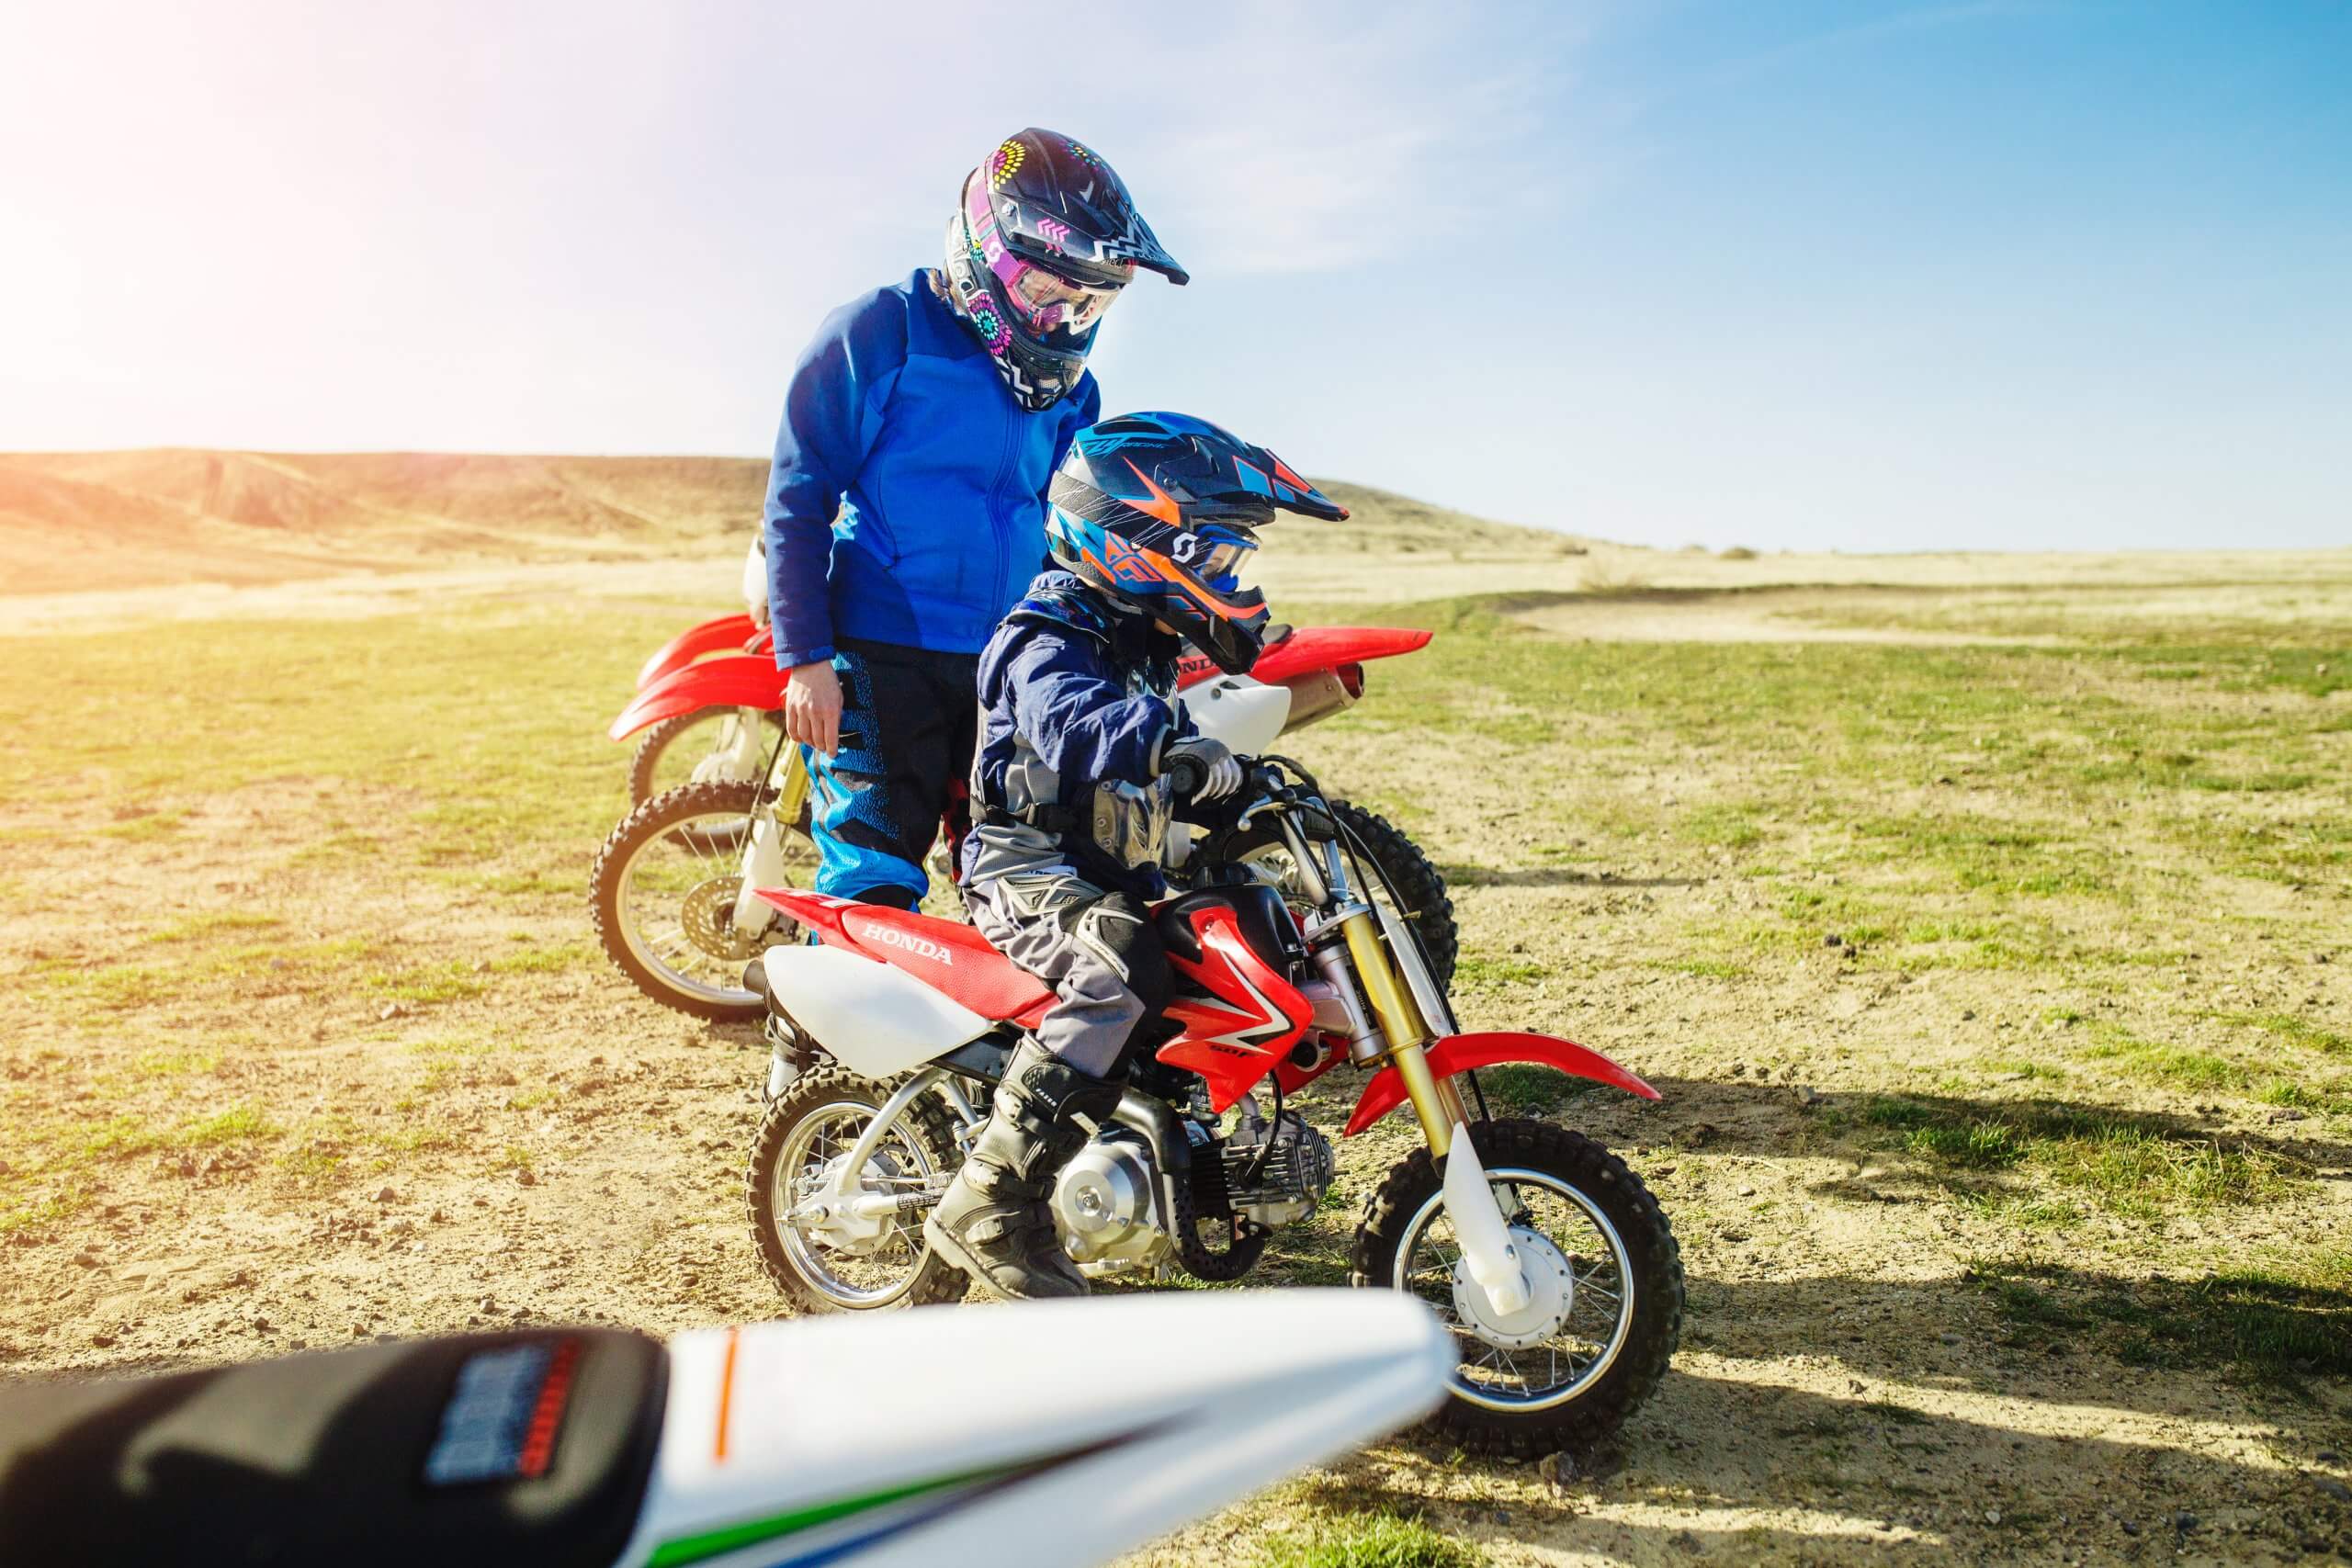 A father and son examining a dirt bike on a trail.